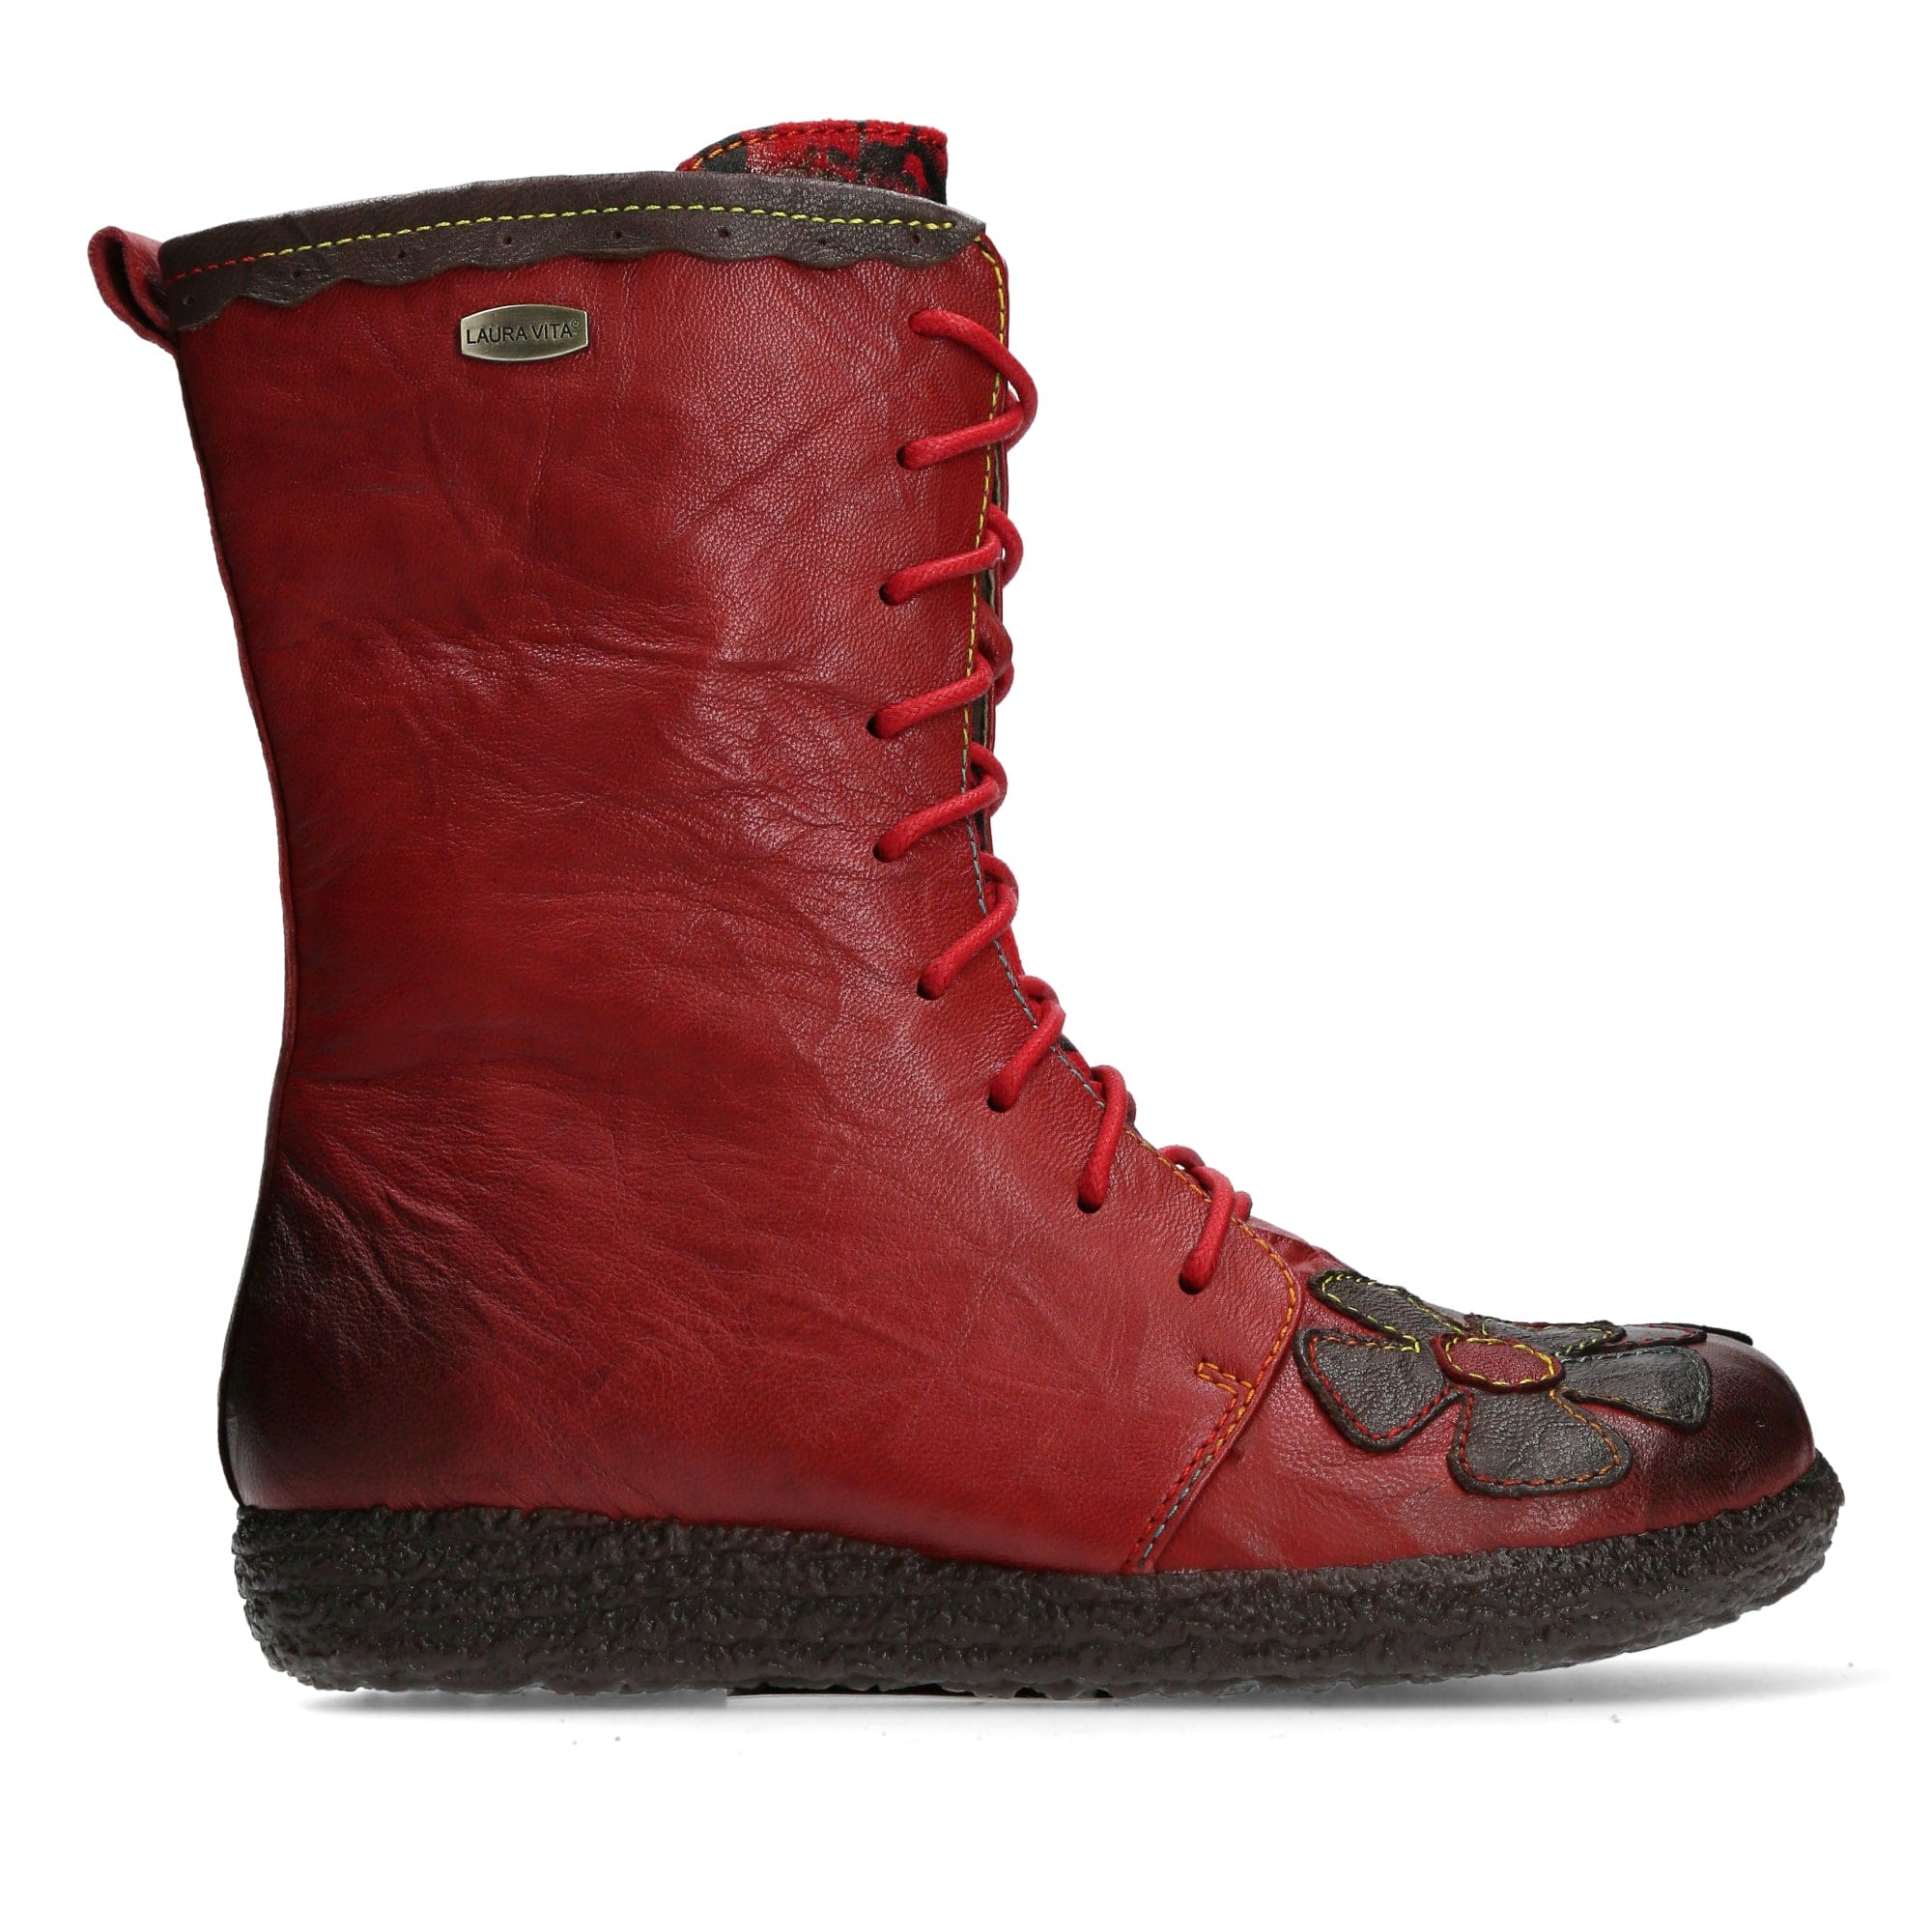 Shoes GOCNO 05 - 35 / Red - Boots